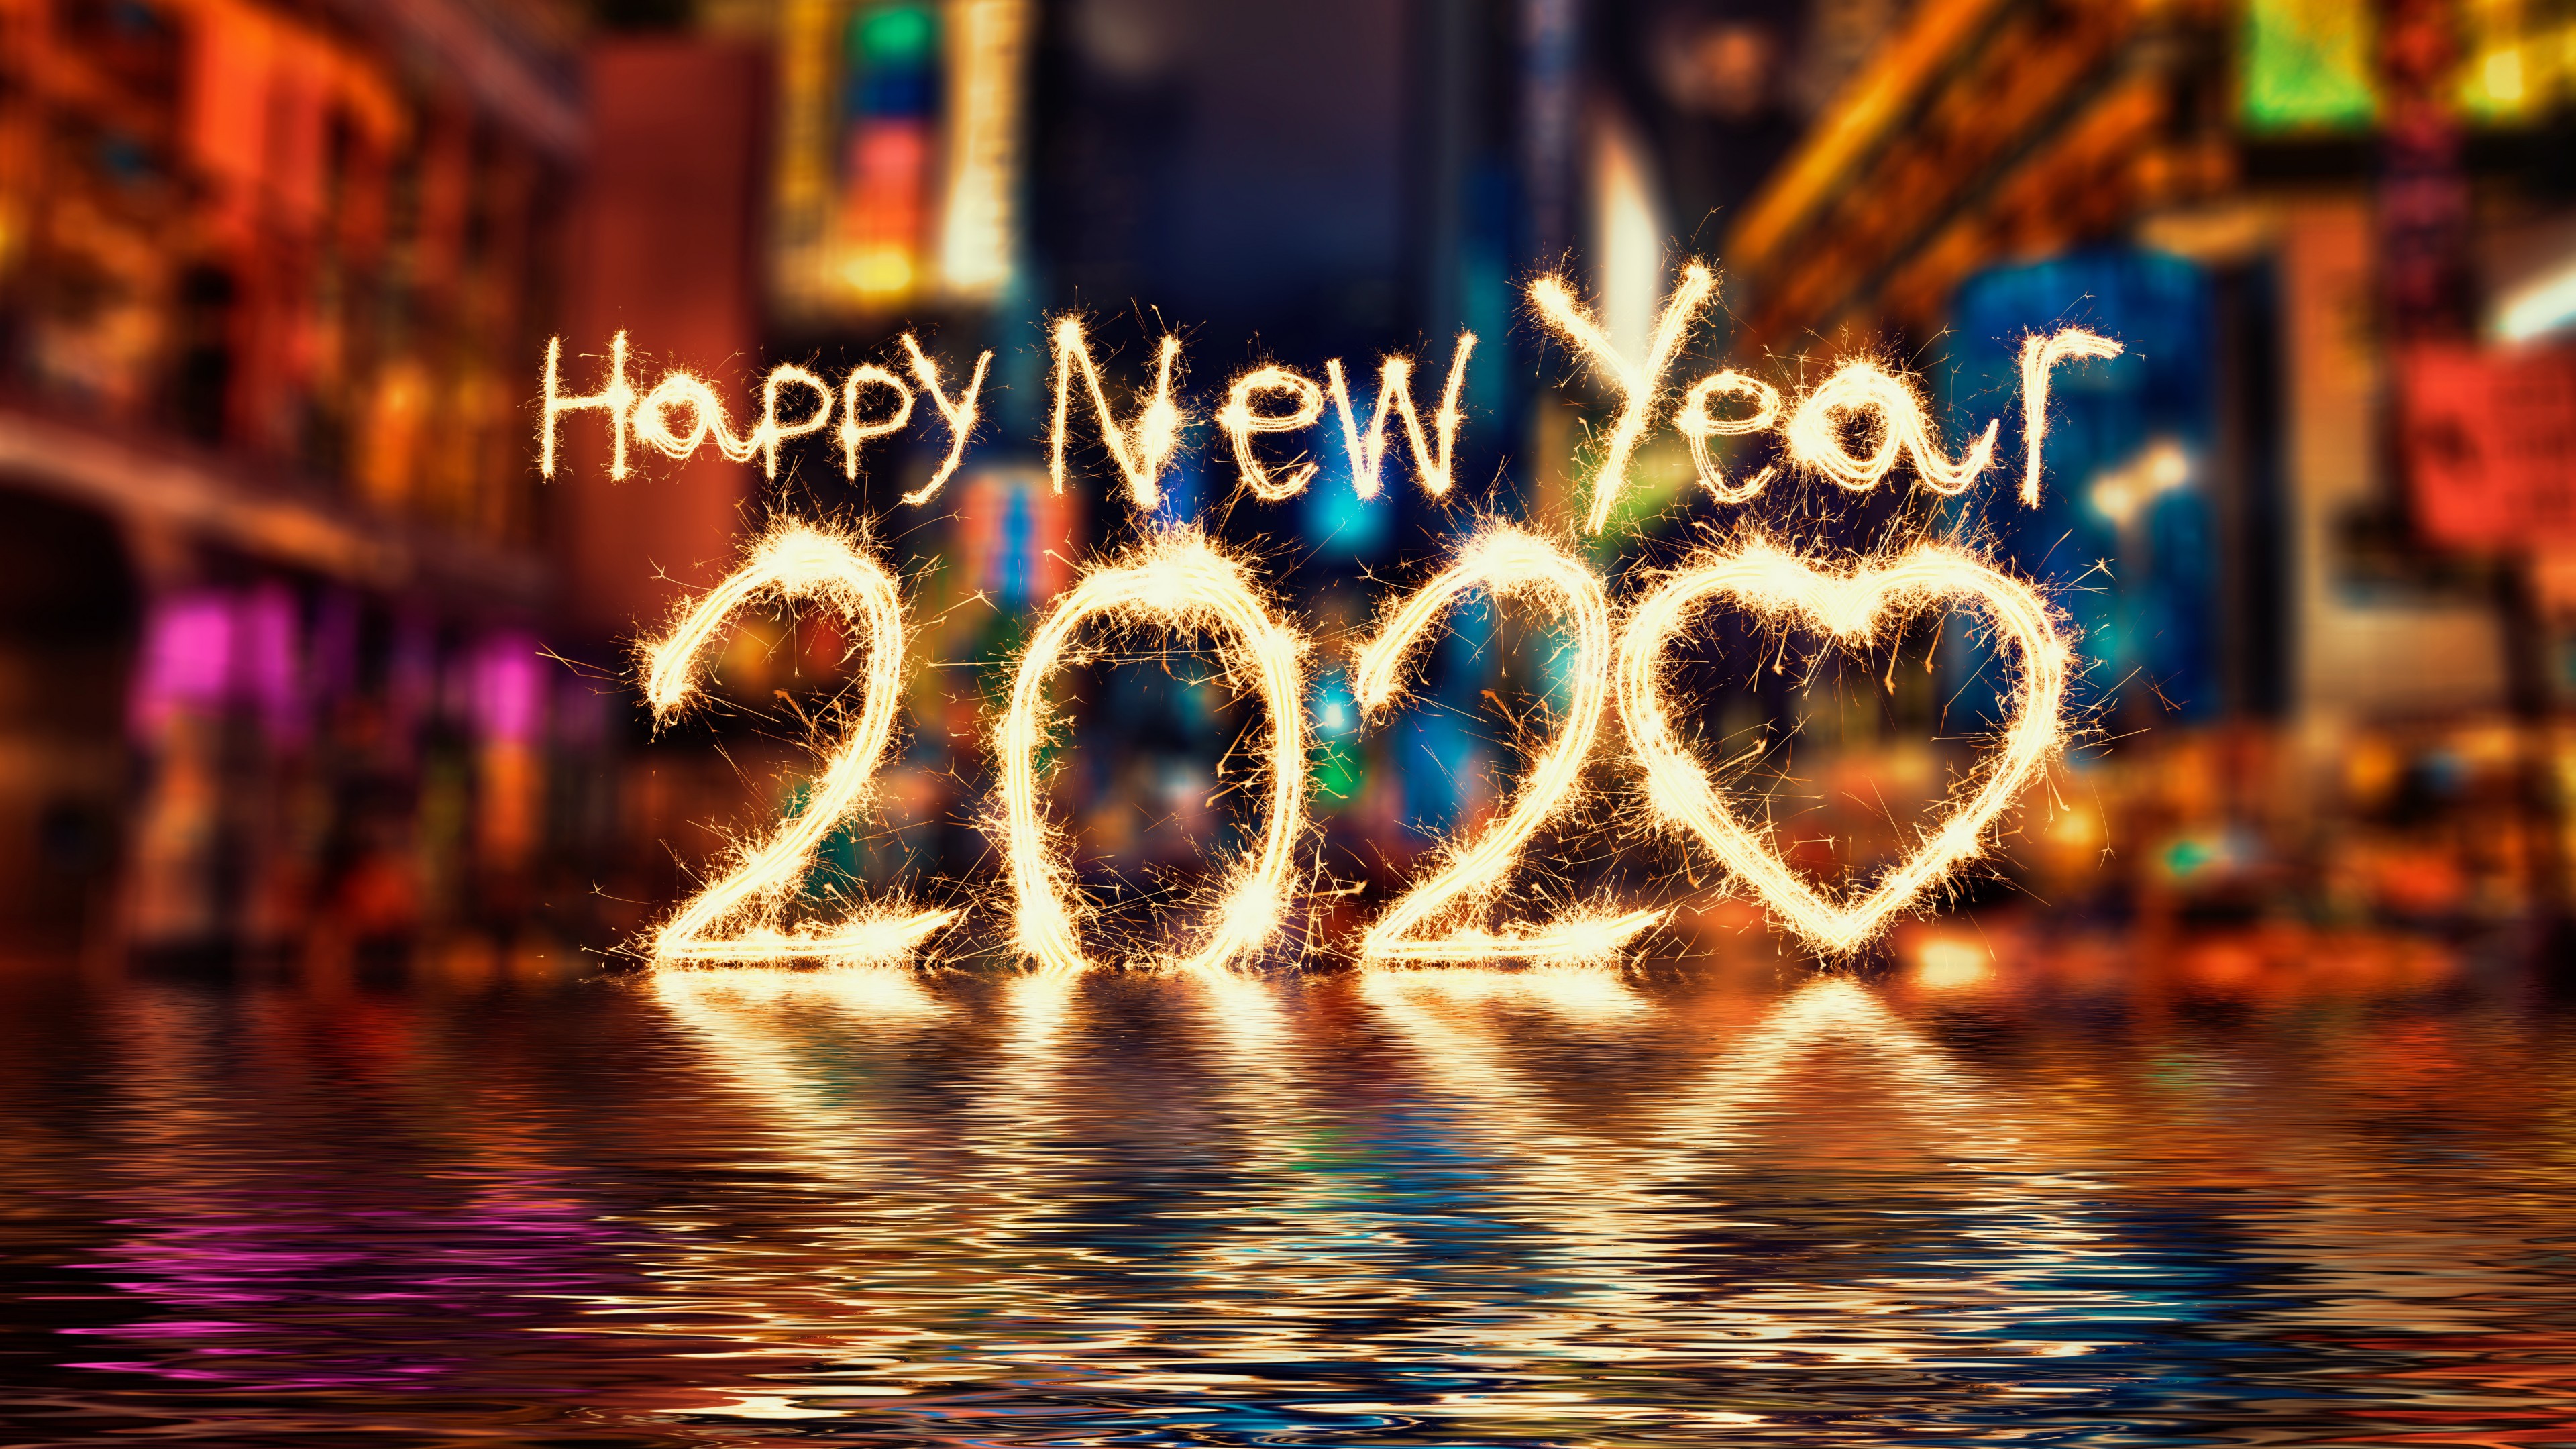 Happy New Year 2020 4k Wallpapers - Wallpaper Cave